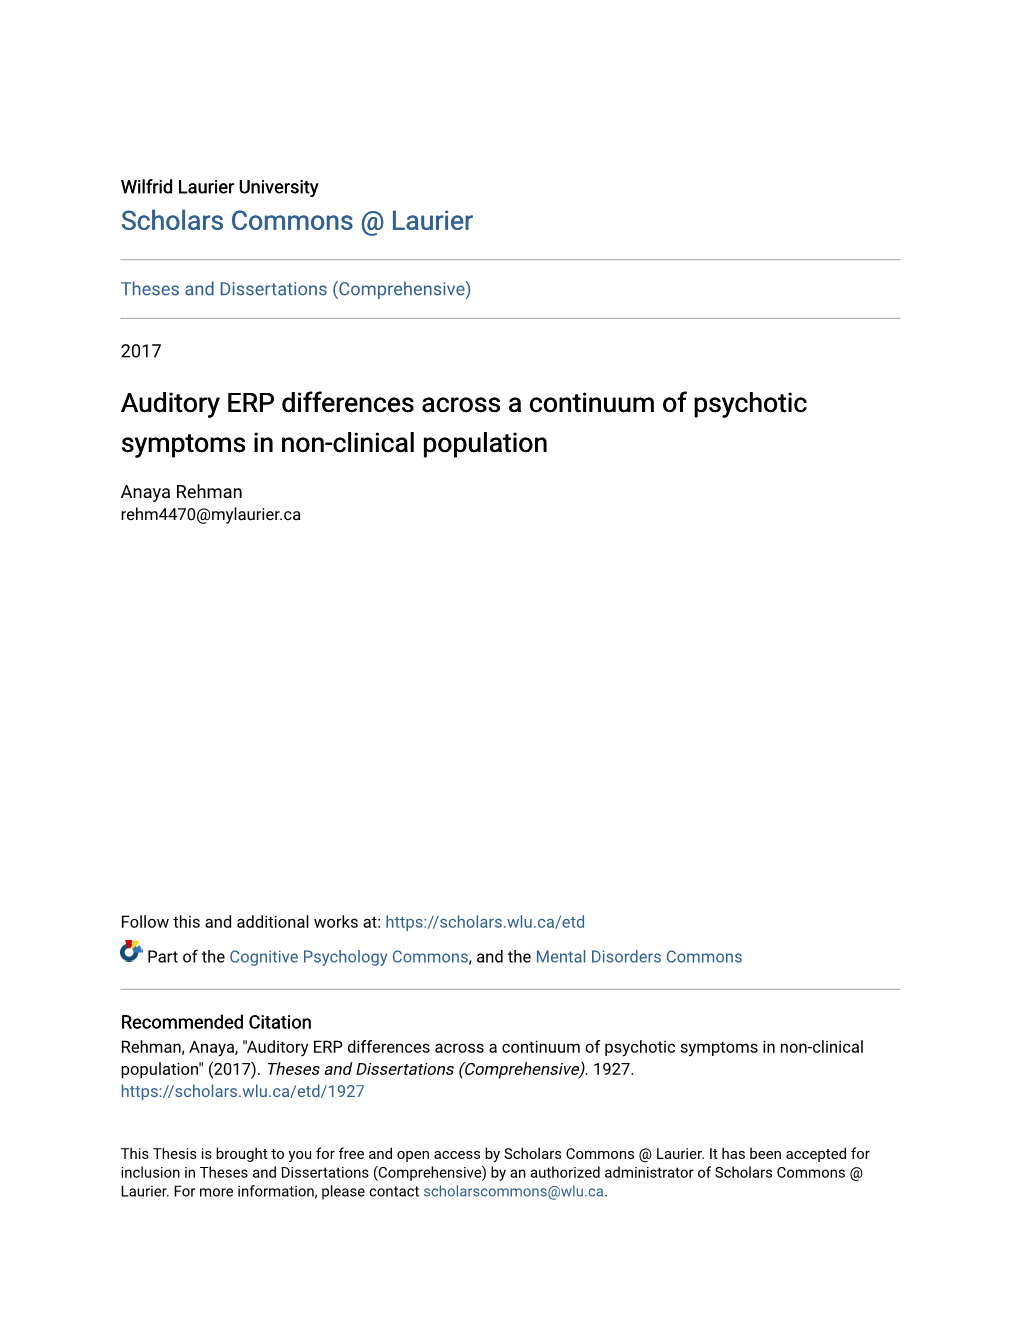 Auditory ERP Differences Across a Continuum of Psychotic Symptoms in Non-Clinical Population